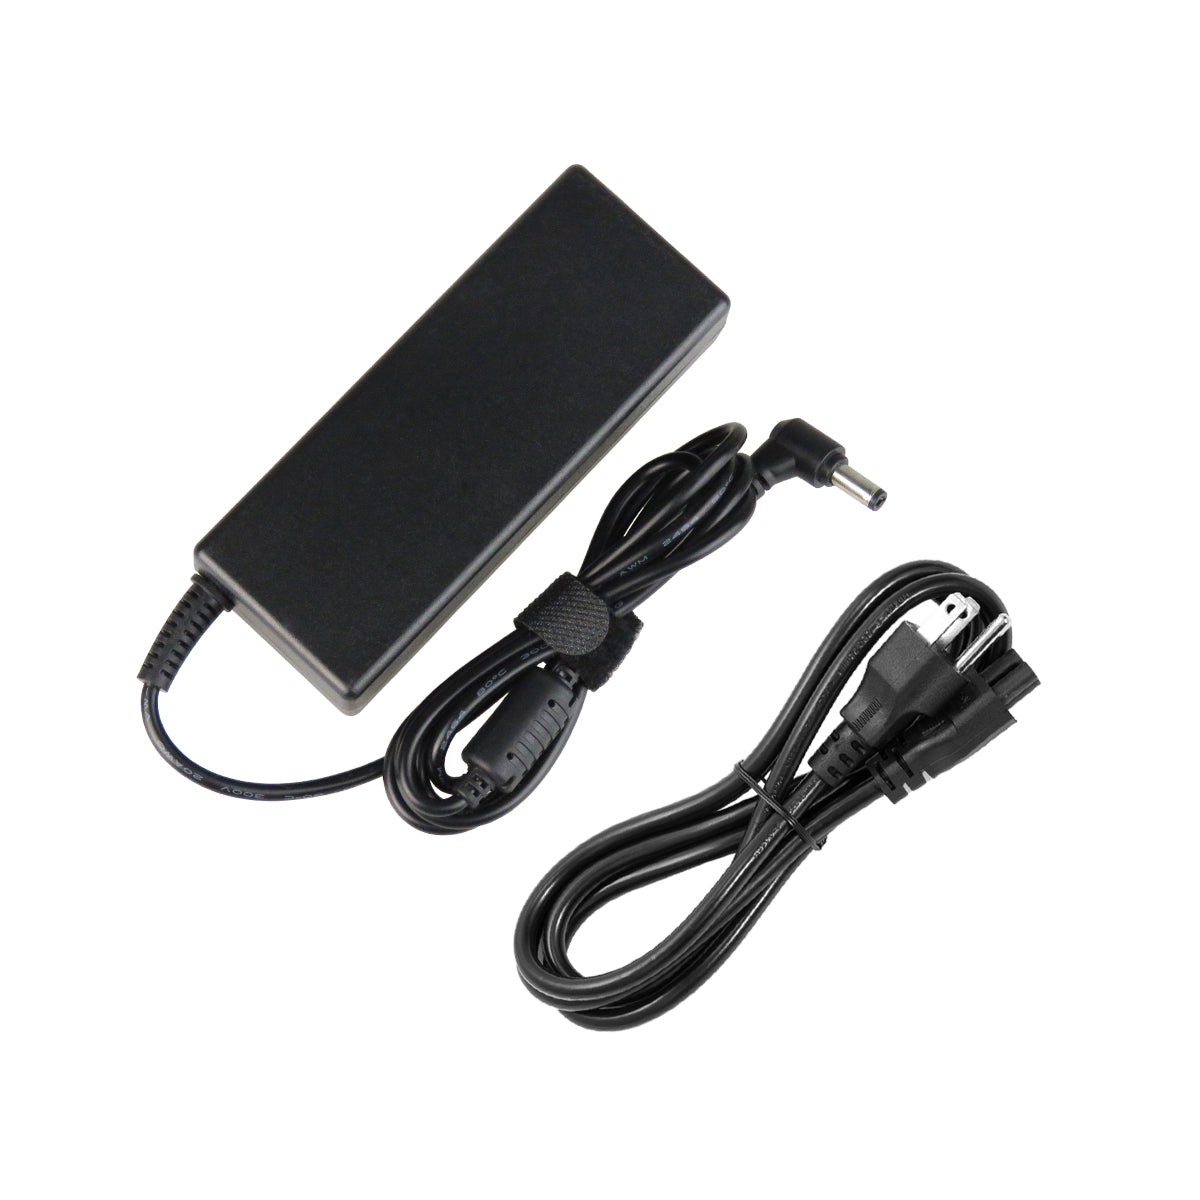 AC Adapter Charger for ASUS N61JQ Notebook.